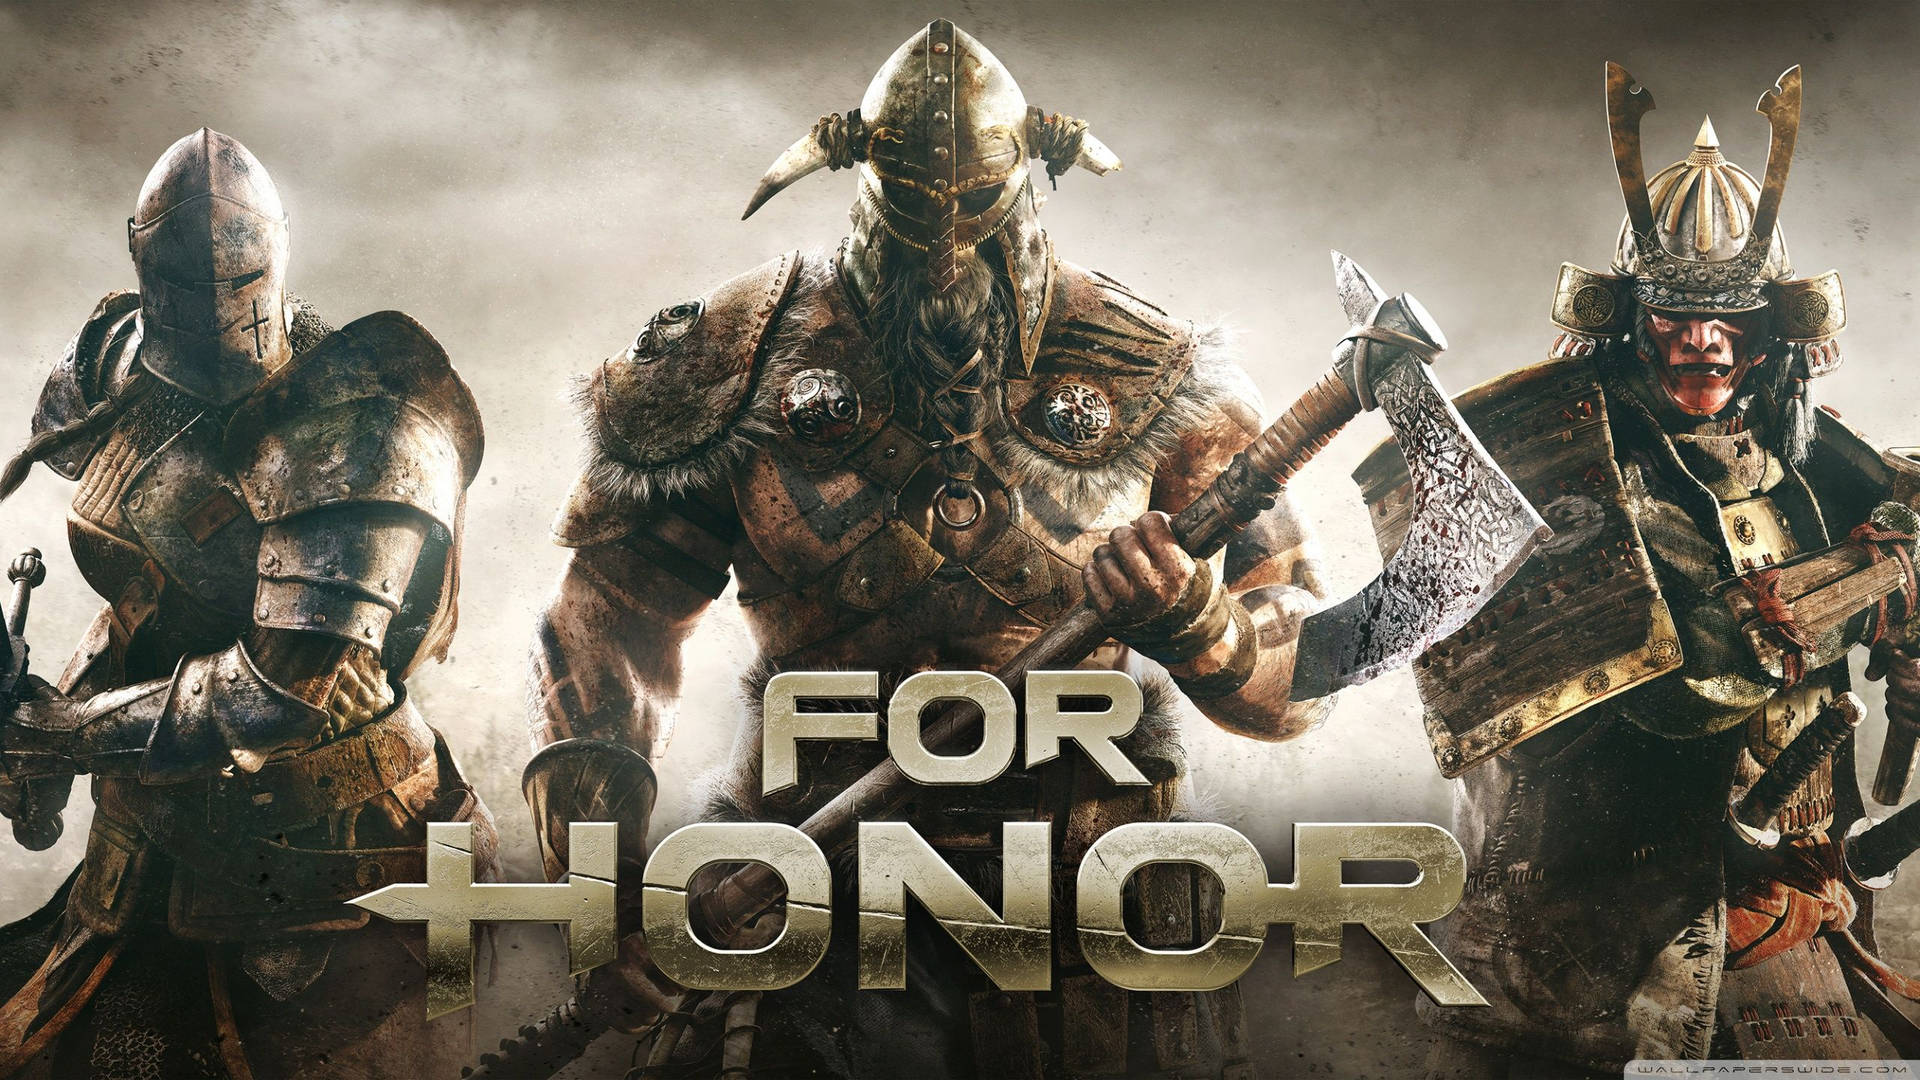 Join the fight and choose your legend in For Honor! Wallpaper